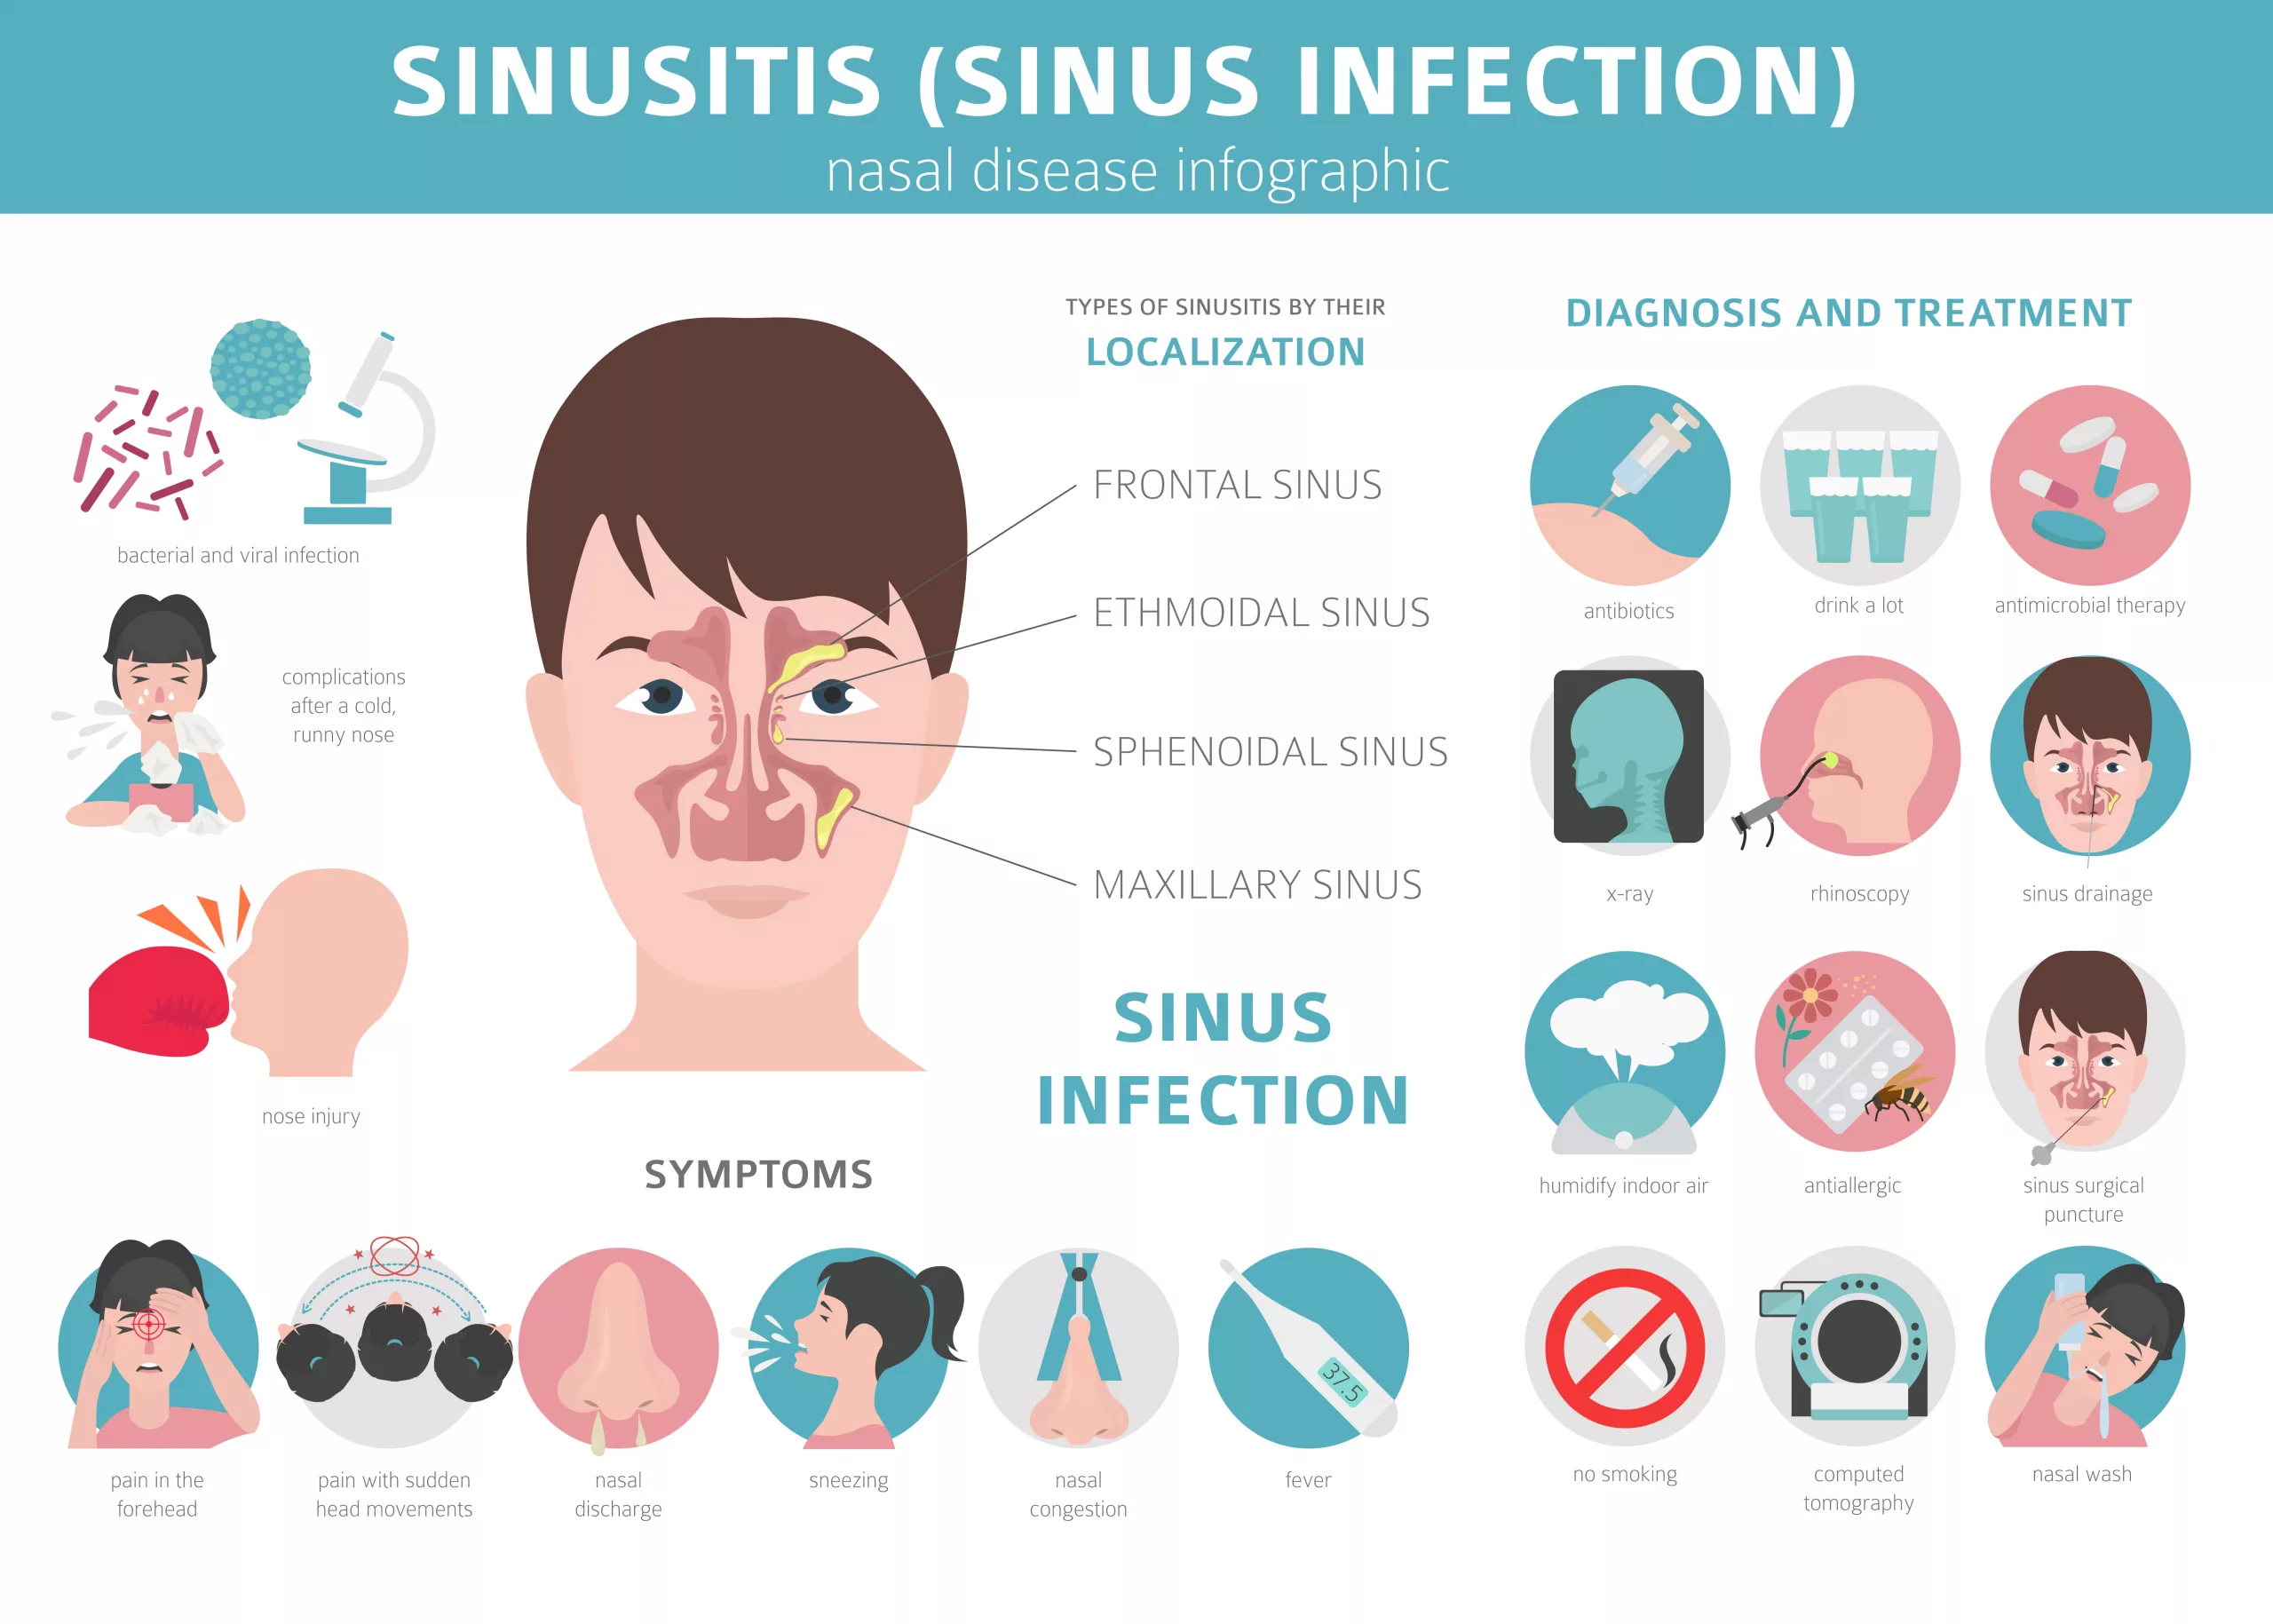 Sinus Infection (Sinusitis) Causes, Symptoms and Treatment